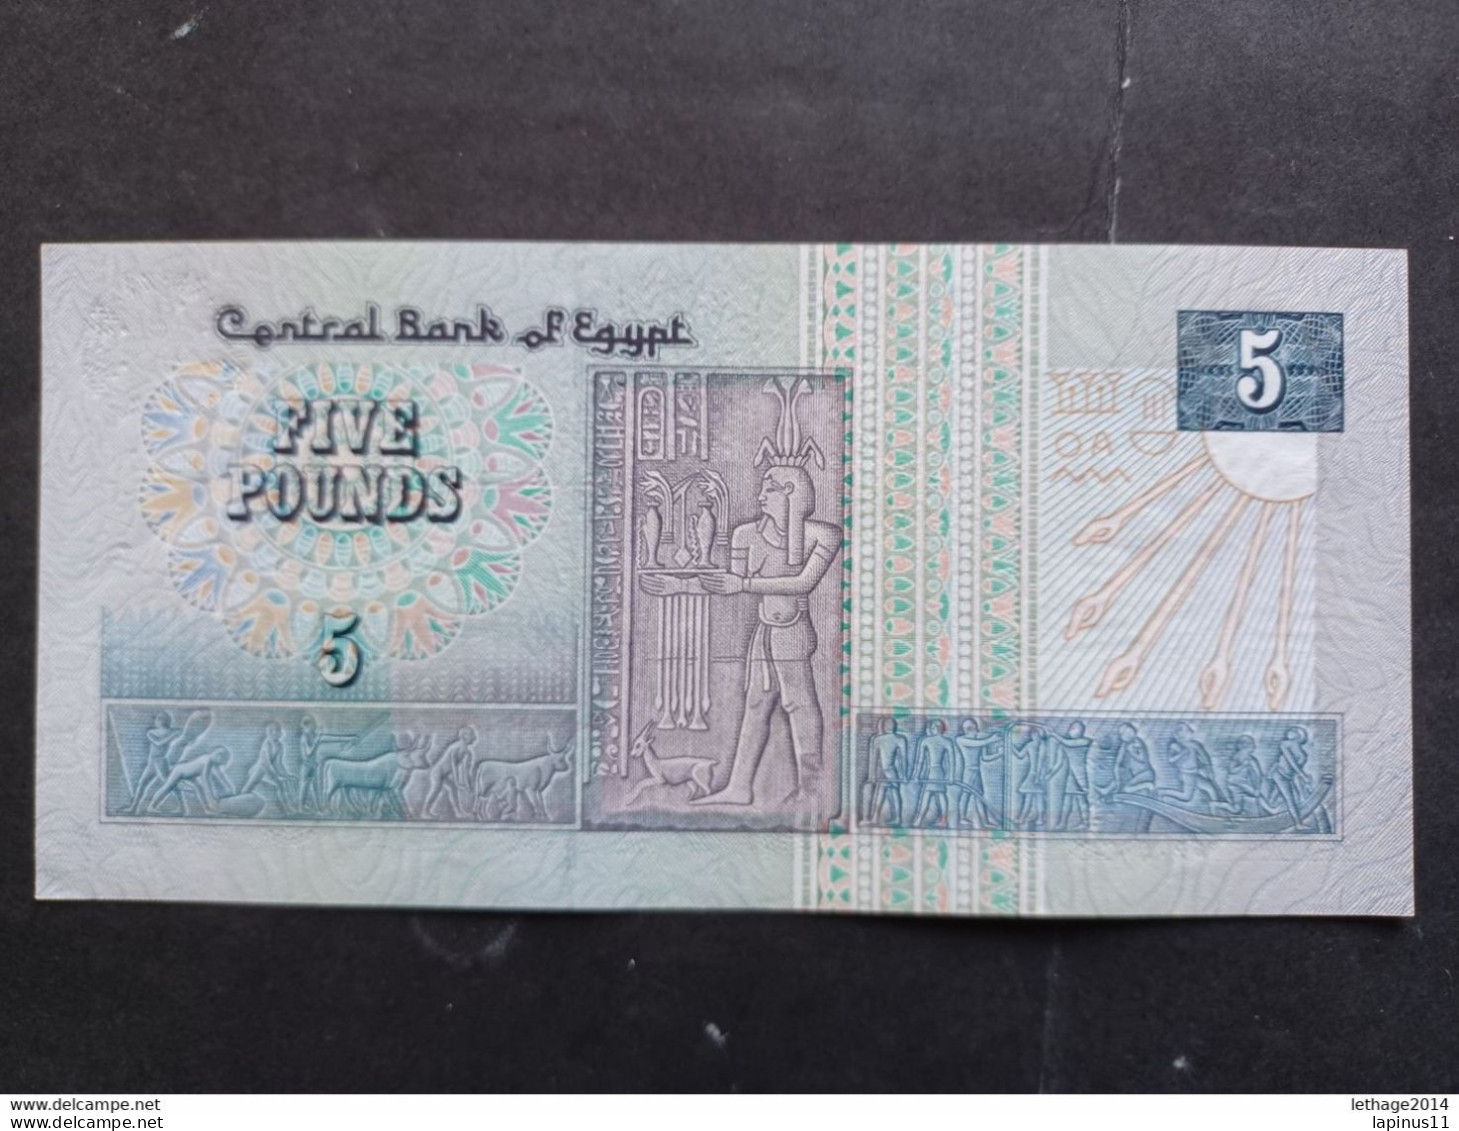 BANKNOTE EGYPT EGYPT 5 POUNDS 1993 UNCIRCULATED - Egitto